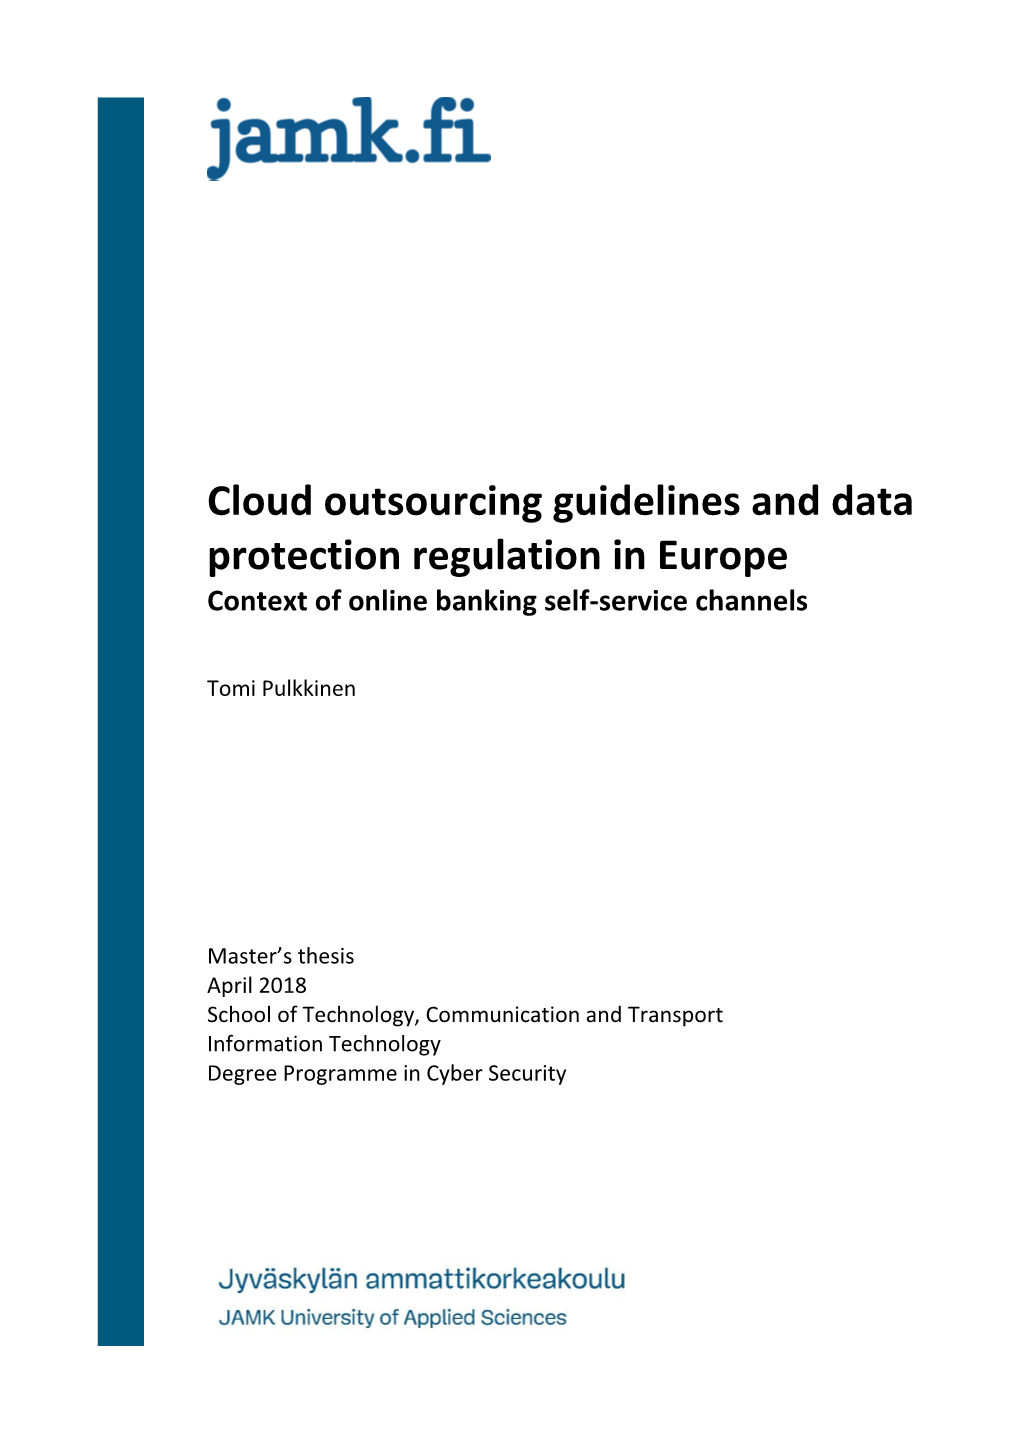 Cloud Outsourcing Guidelines and Data Protection Regulation in Europe Context of Online Banking Self-Service Channels